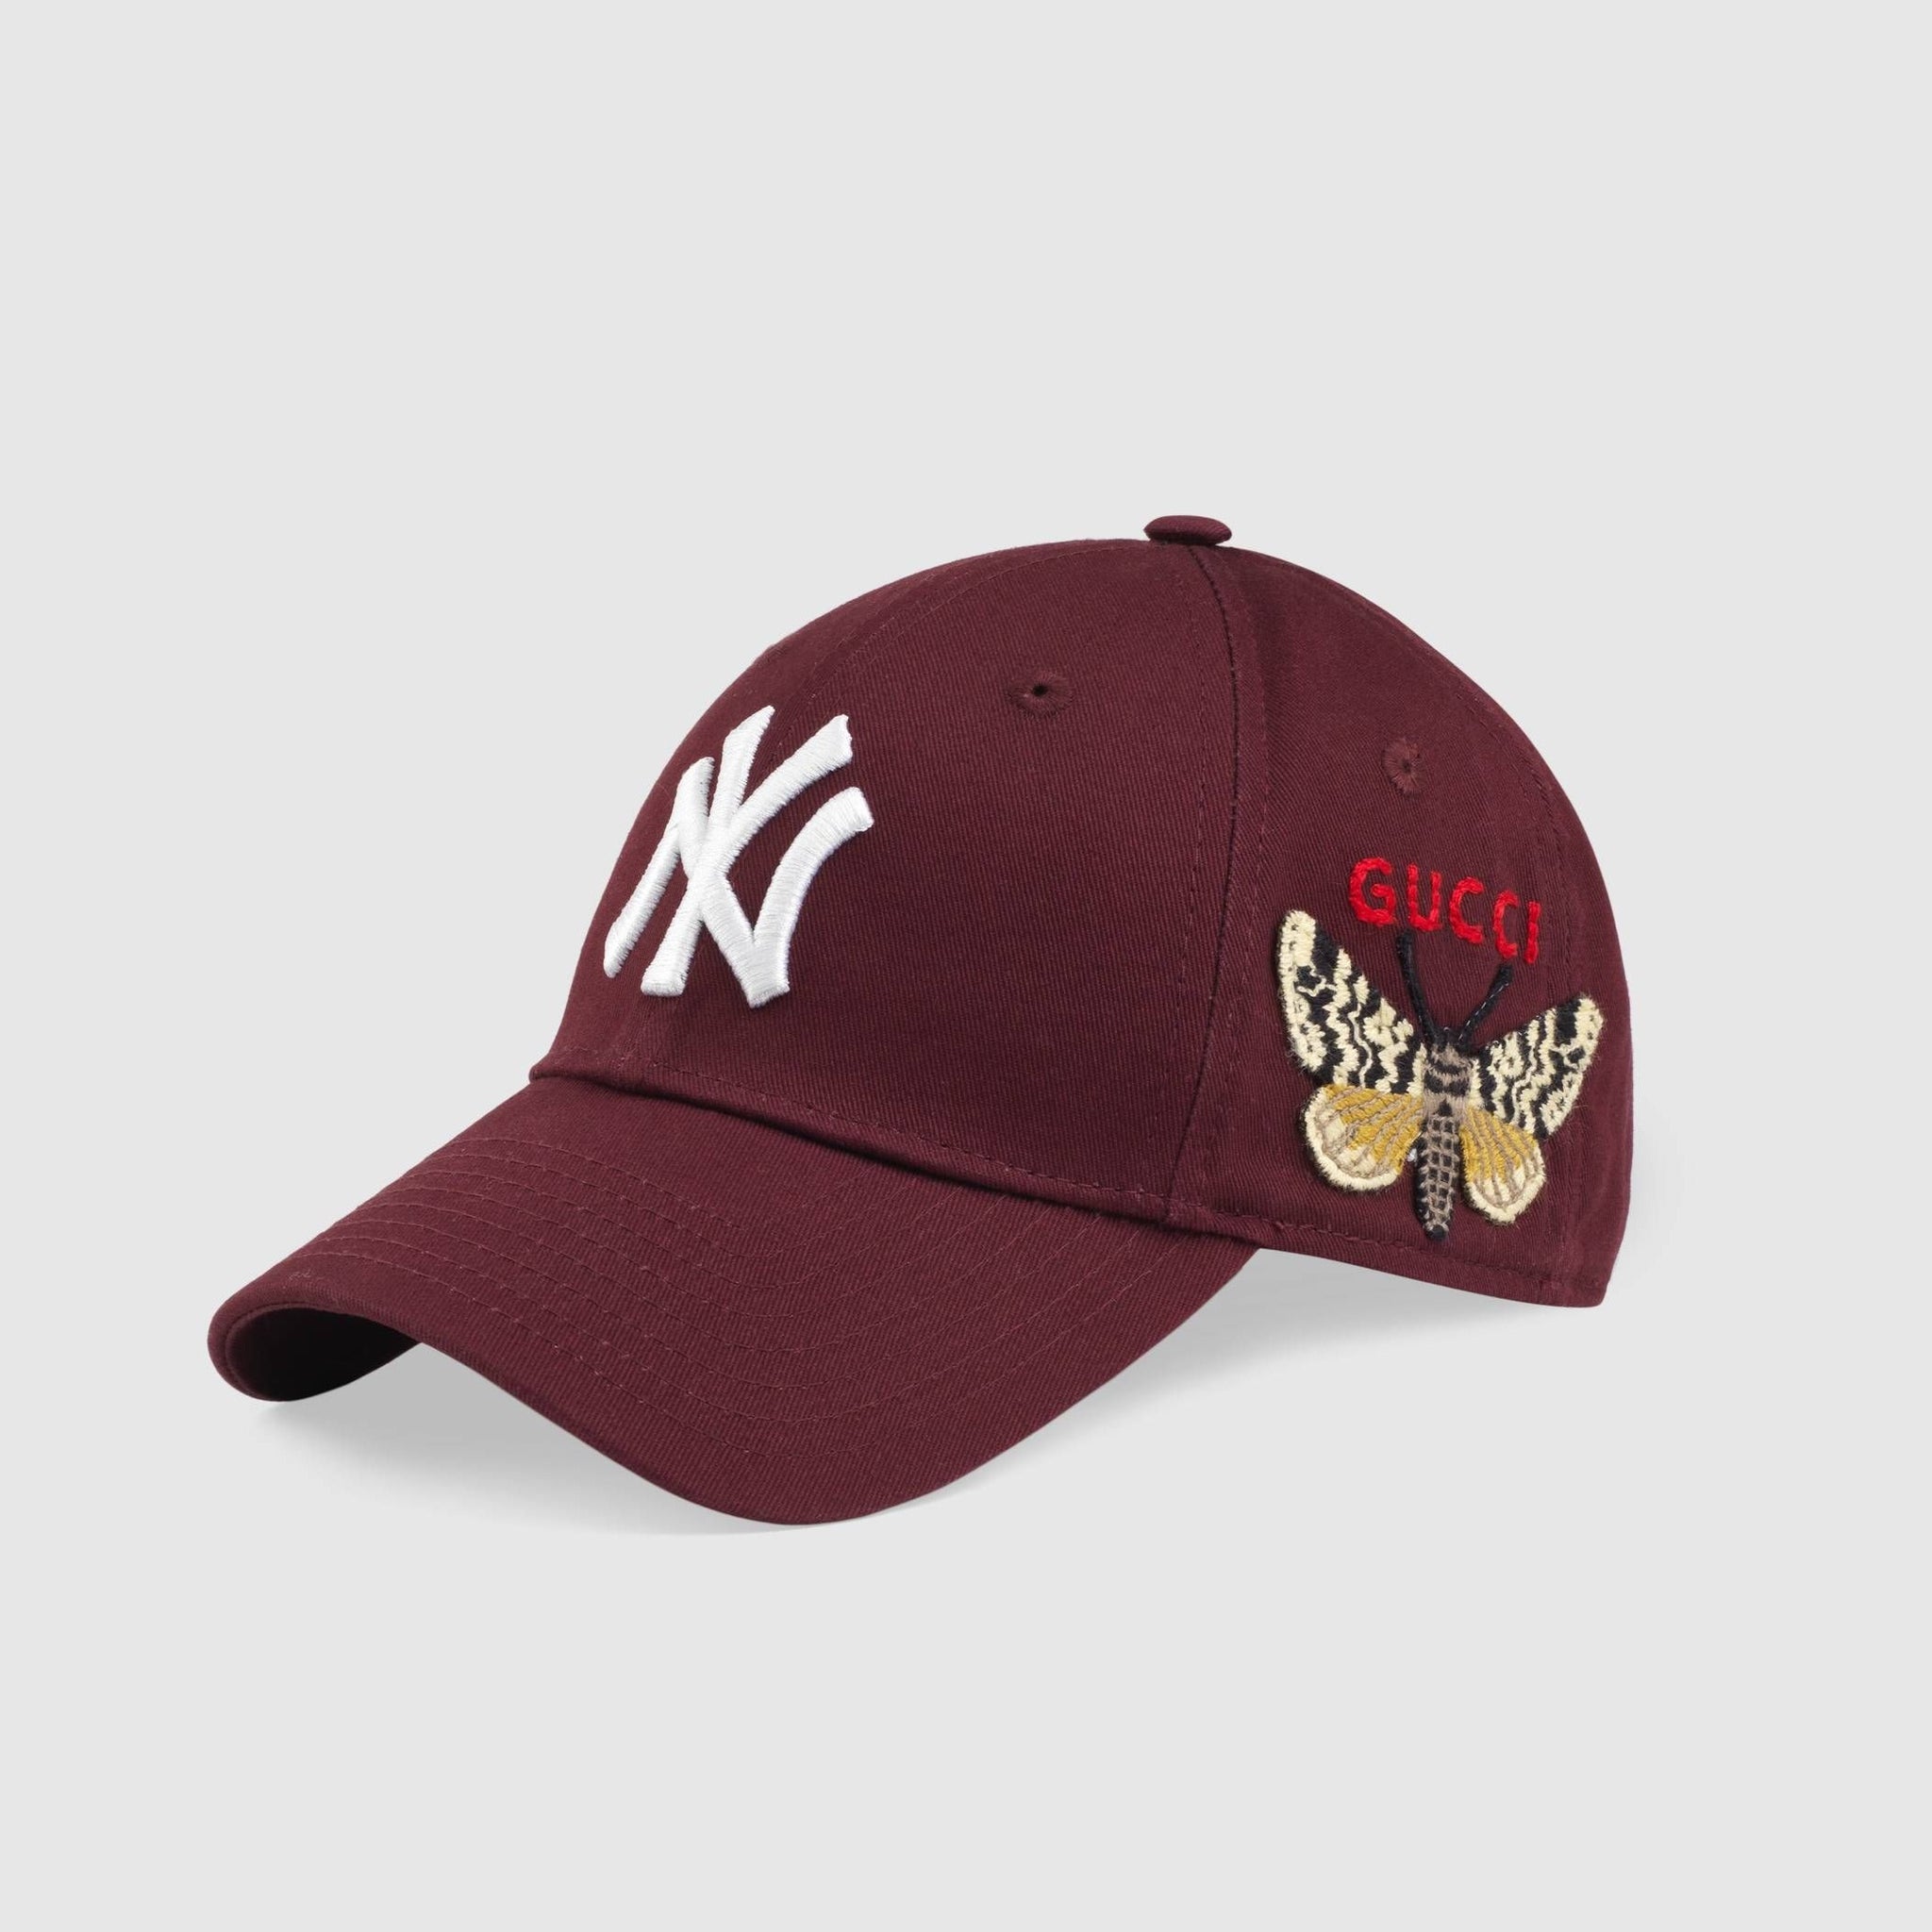 Baseball With Ny Patch In Red – Gavriel.us